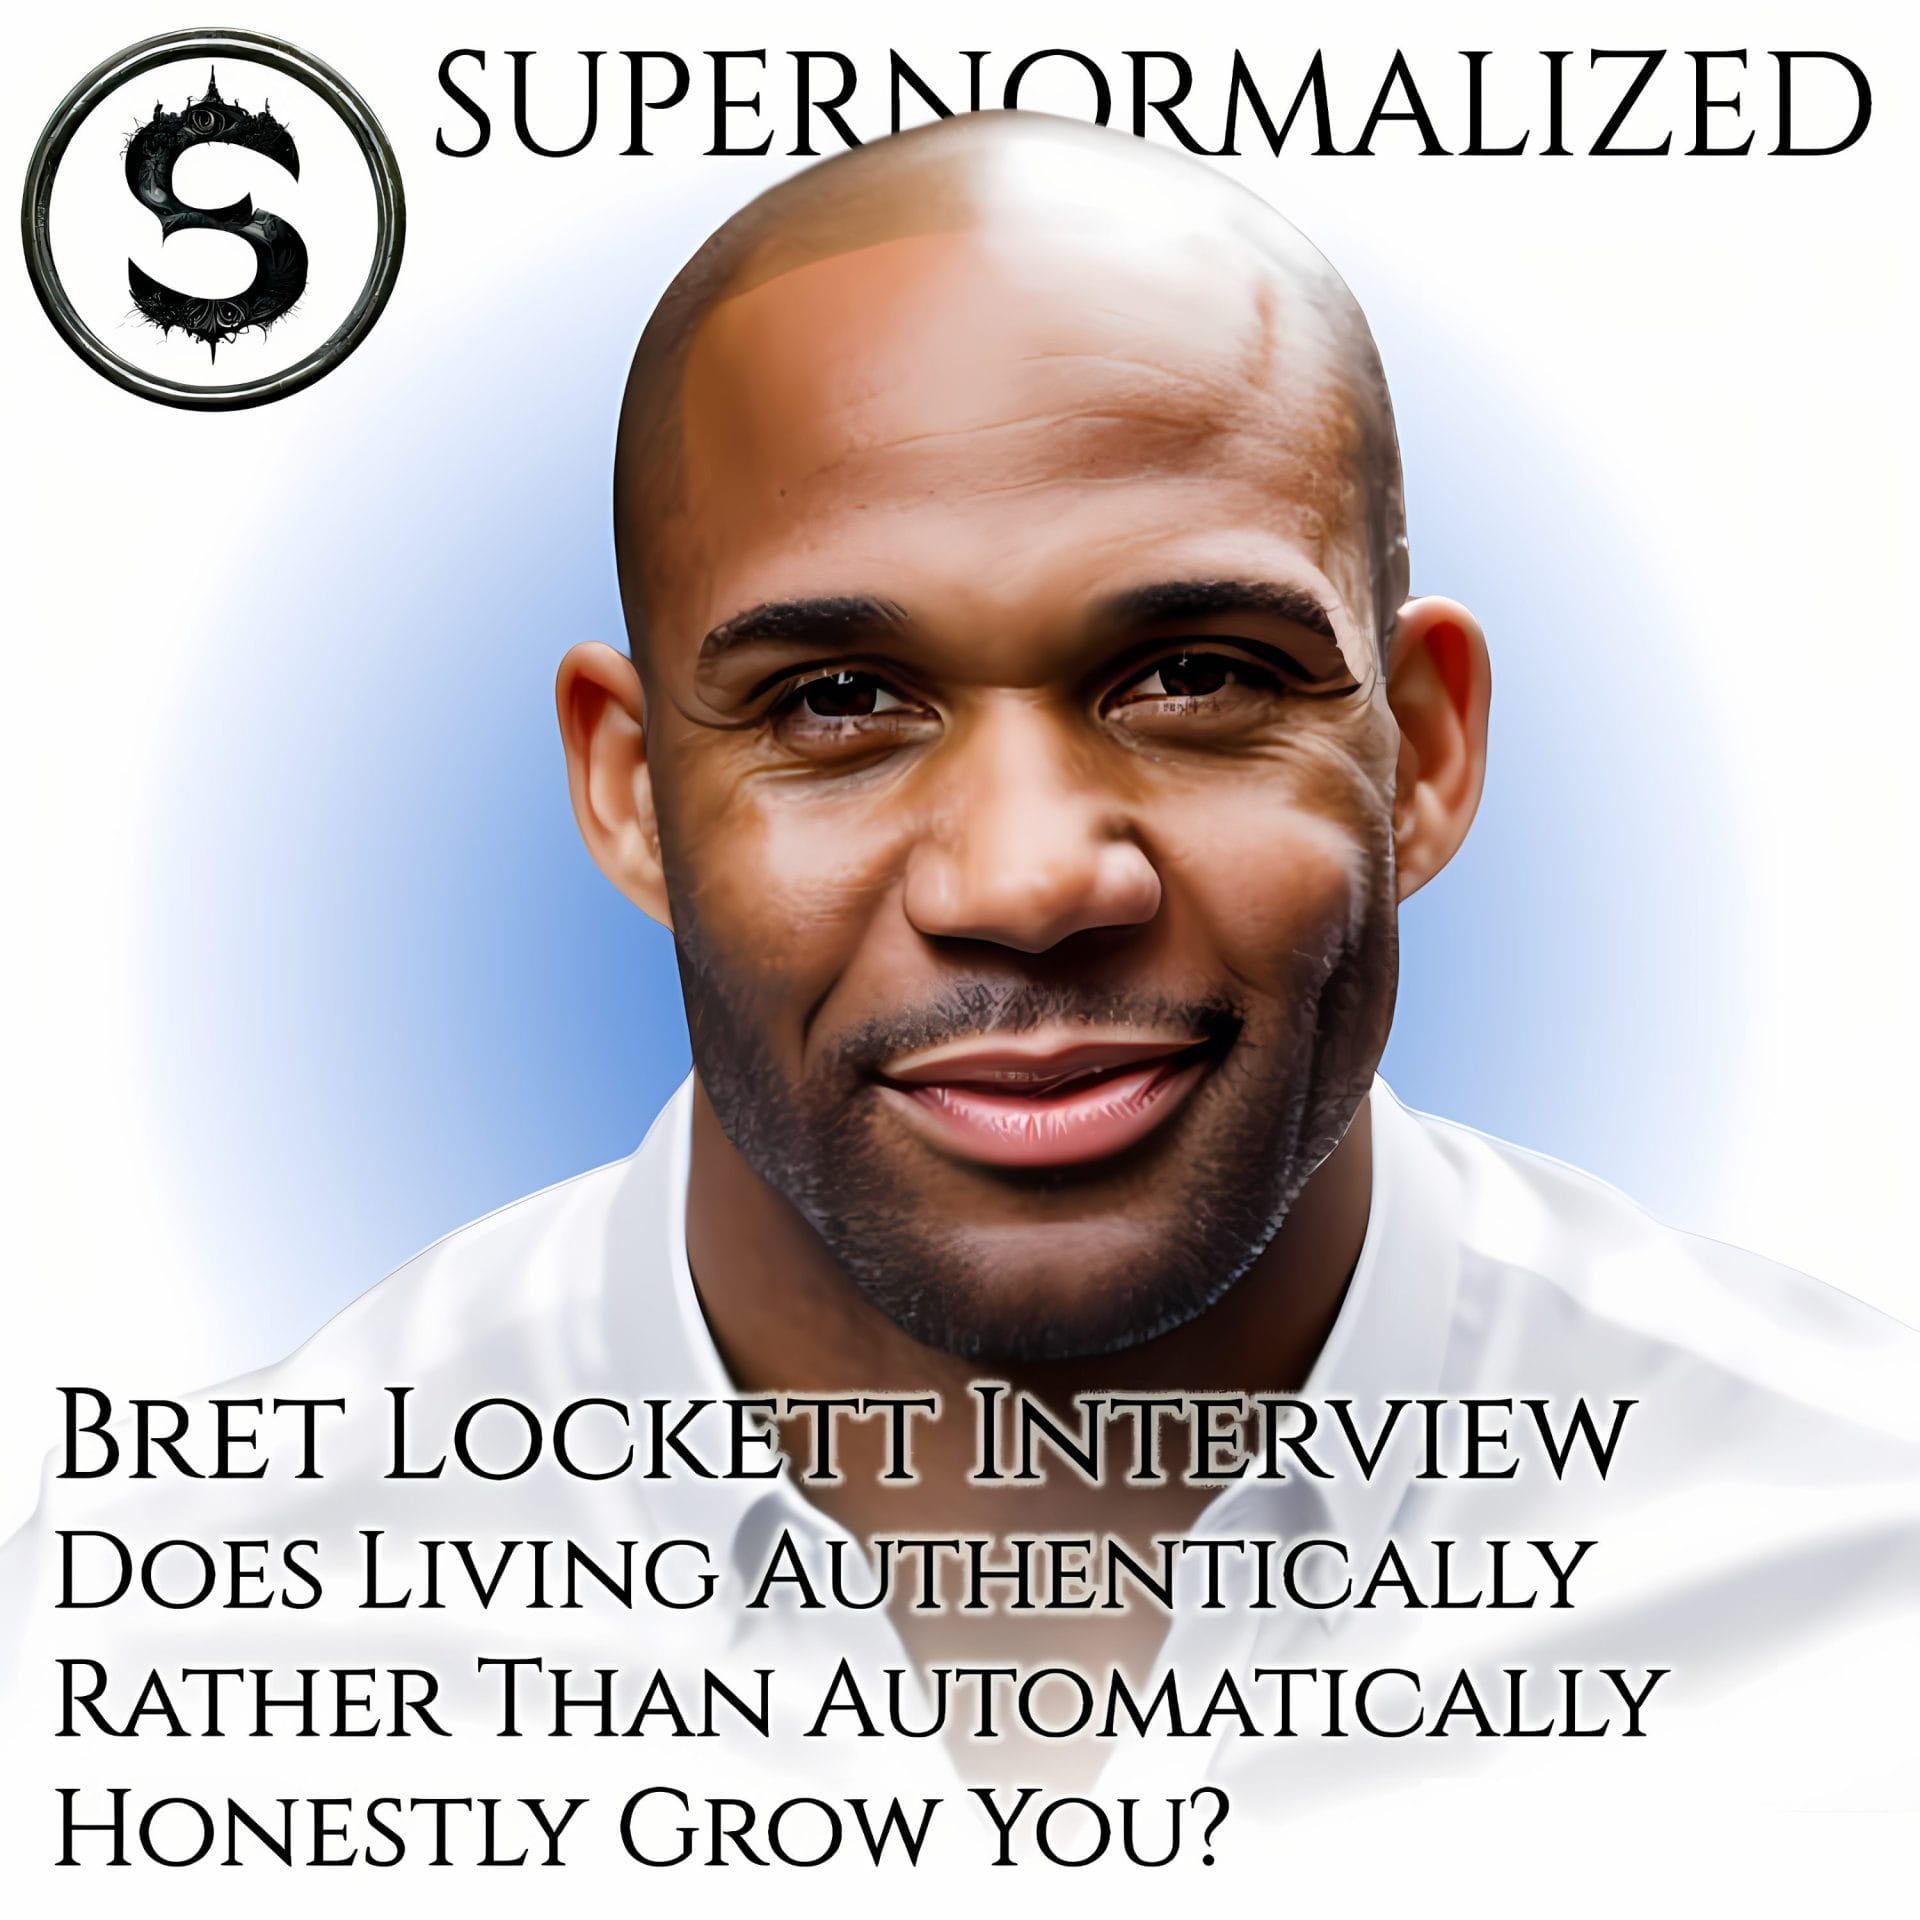 Bret Lockett Interview Does Living Authentically Rather Than Automatically Honestly Grow You?